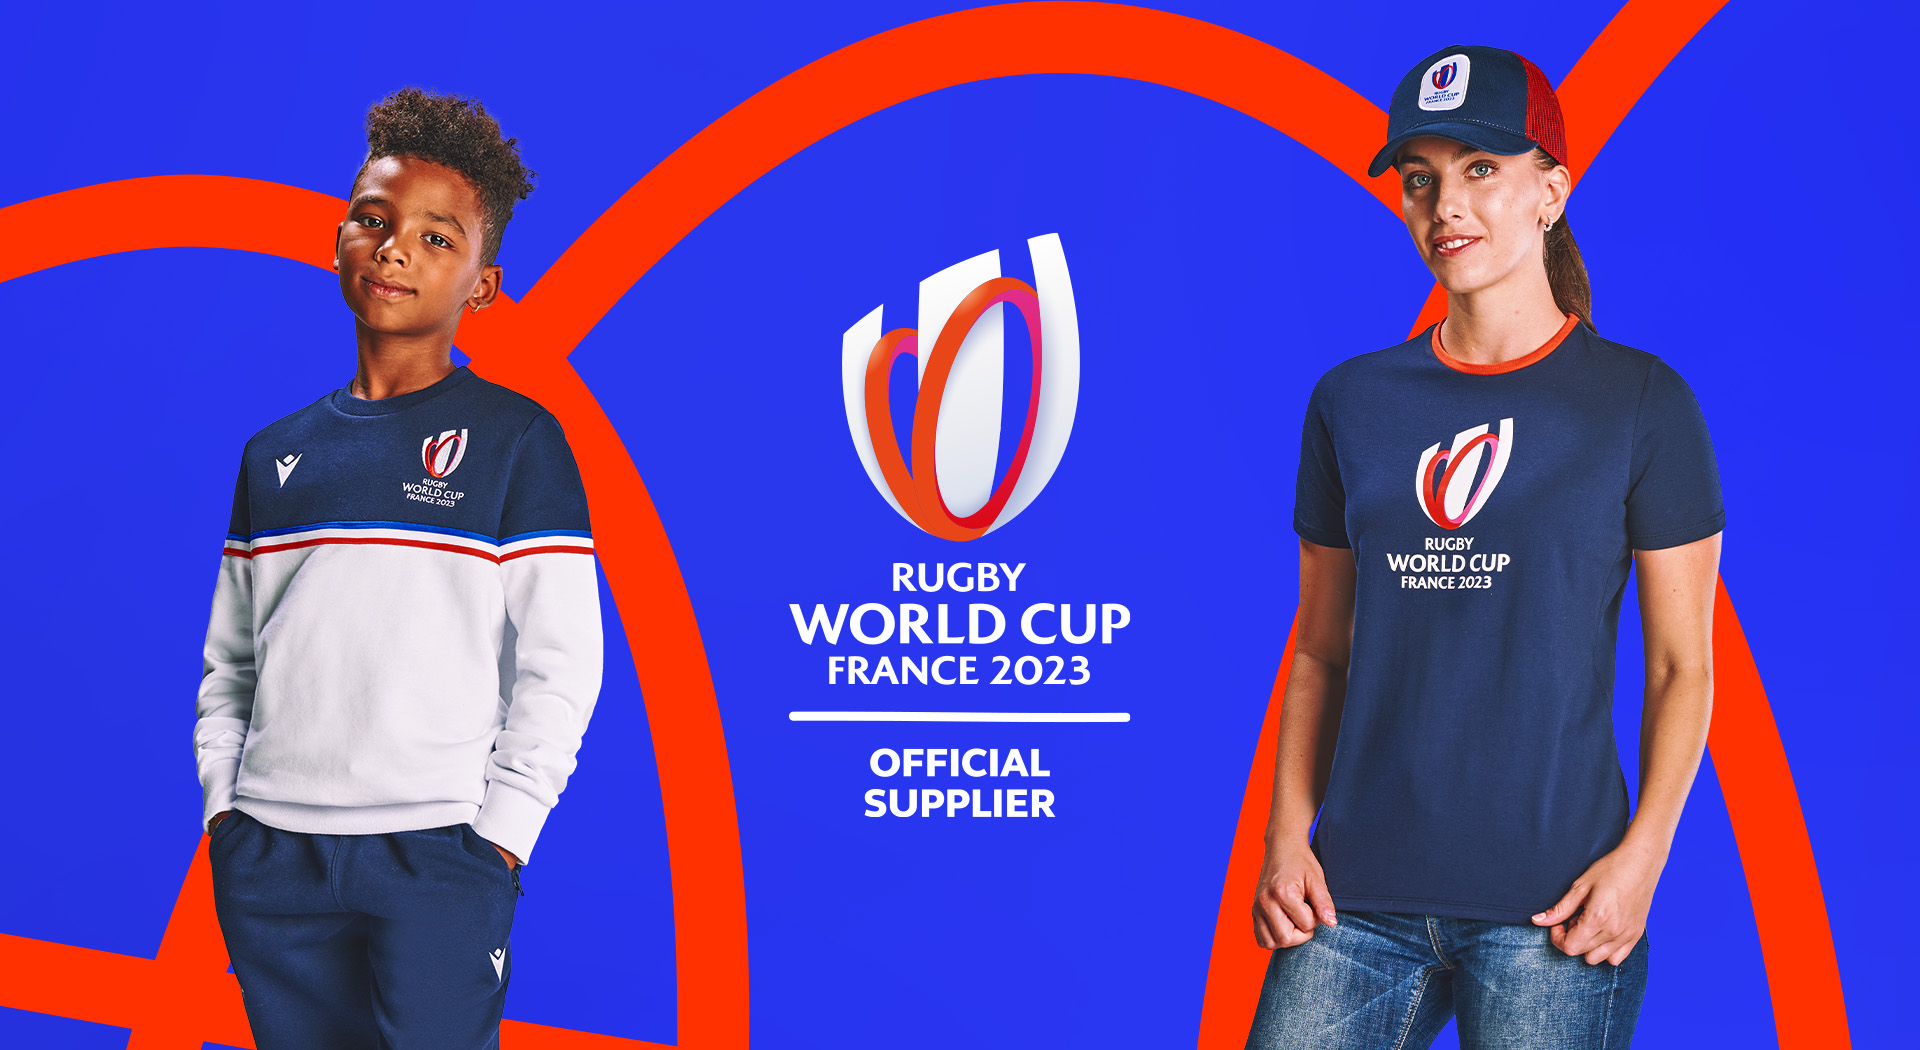 Macron Passion, style, and elegance: Macron presents official merchandise line for Rugby World Cup 2023 in France | Image 1